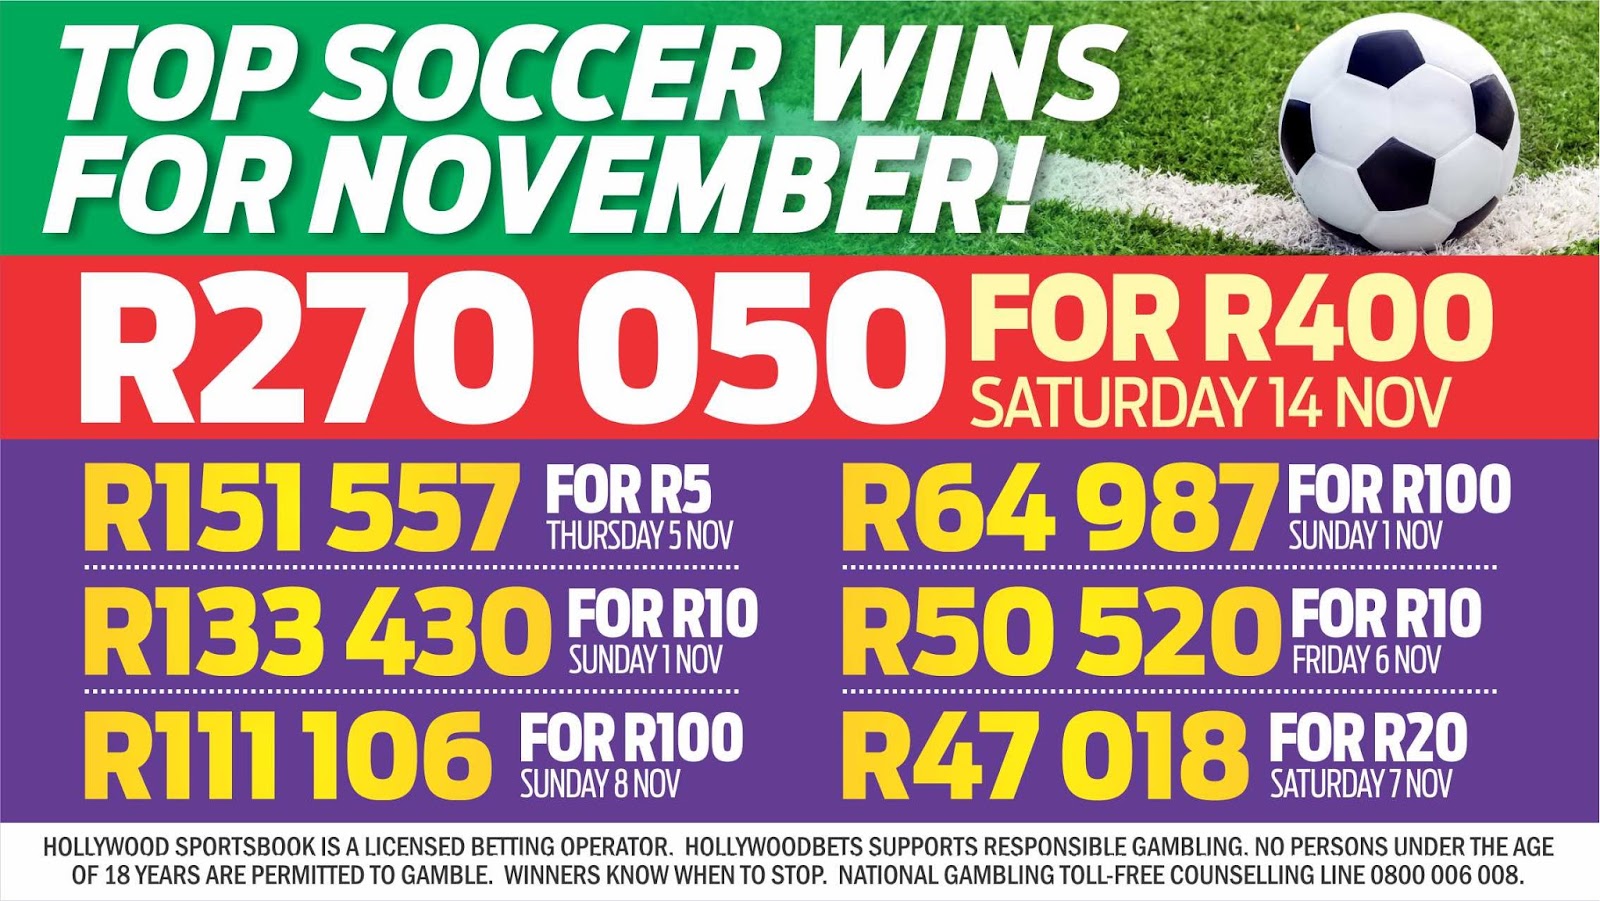 Hollywoodbets Top Soccer Wins Betting November 4